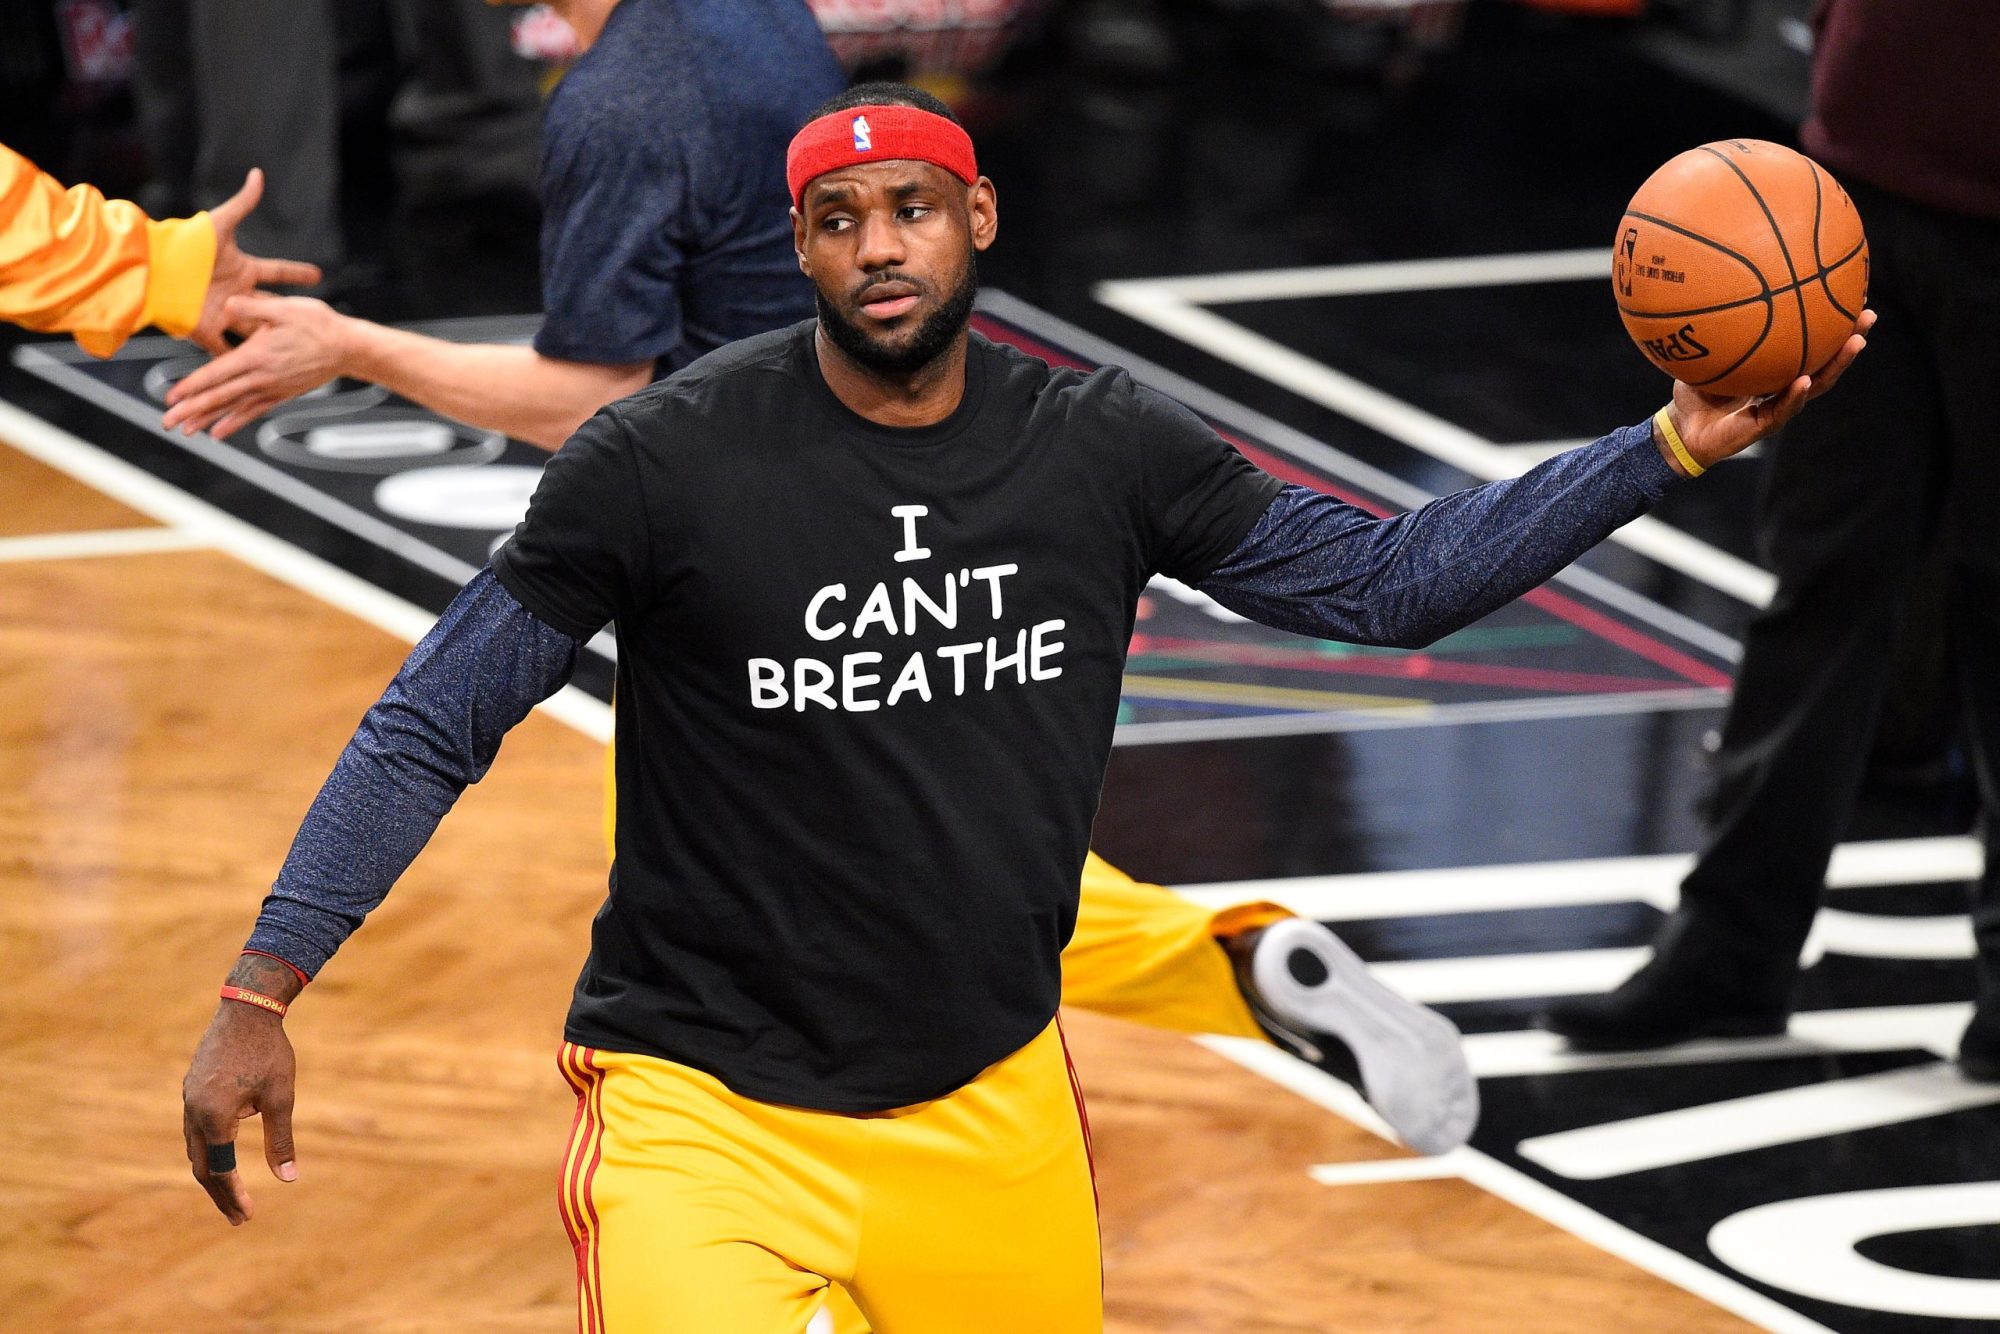 Cleveland Cavaliers forward LeBron James (23) wears a t shirt to honor Eric Garner during warmups before a NBA game between the Cleveland Cavaliers and the Brooklyn Nets at Barclays Center in Brooklyn, NY. Photo by Rich Kane/Icon Sportswire/Corbis/Icon Sportswire via Getty Images